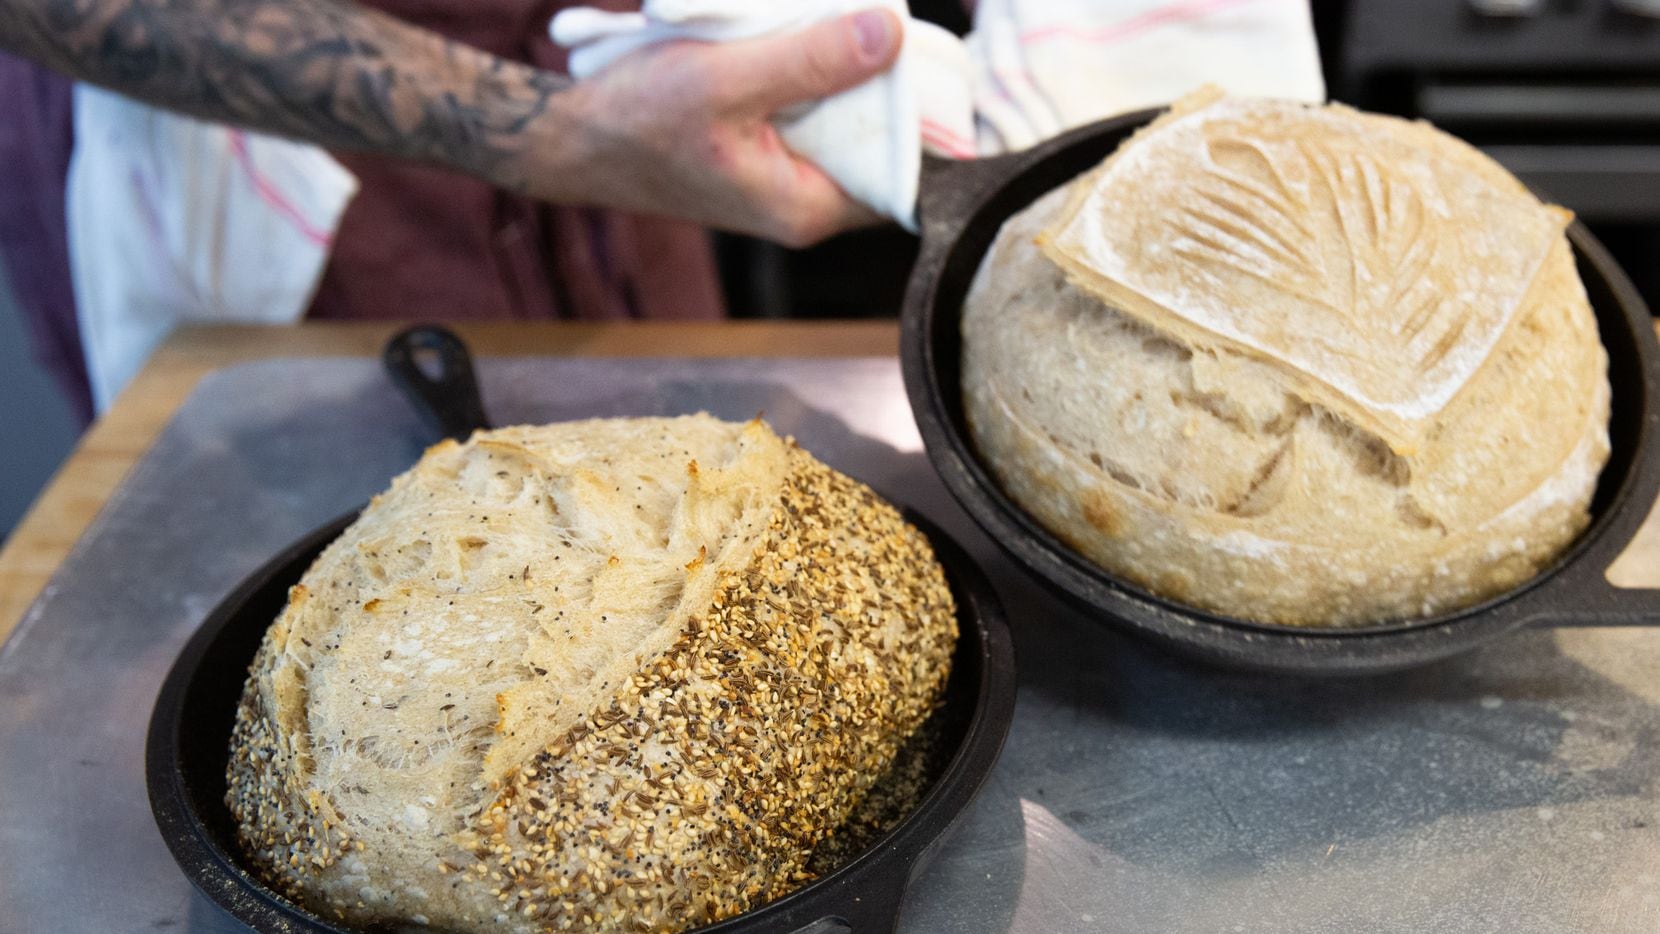 Matt Bresnan, head chef at Food Company, removes two loaves of bread in the Nonna kitchen in...